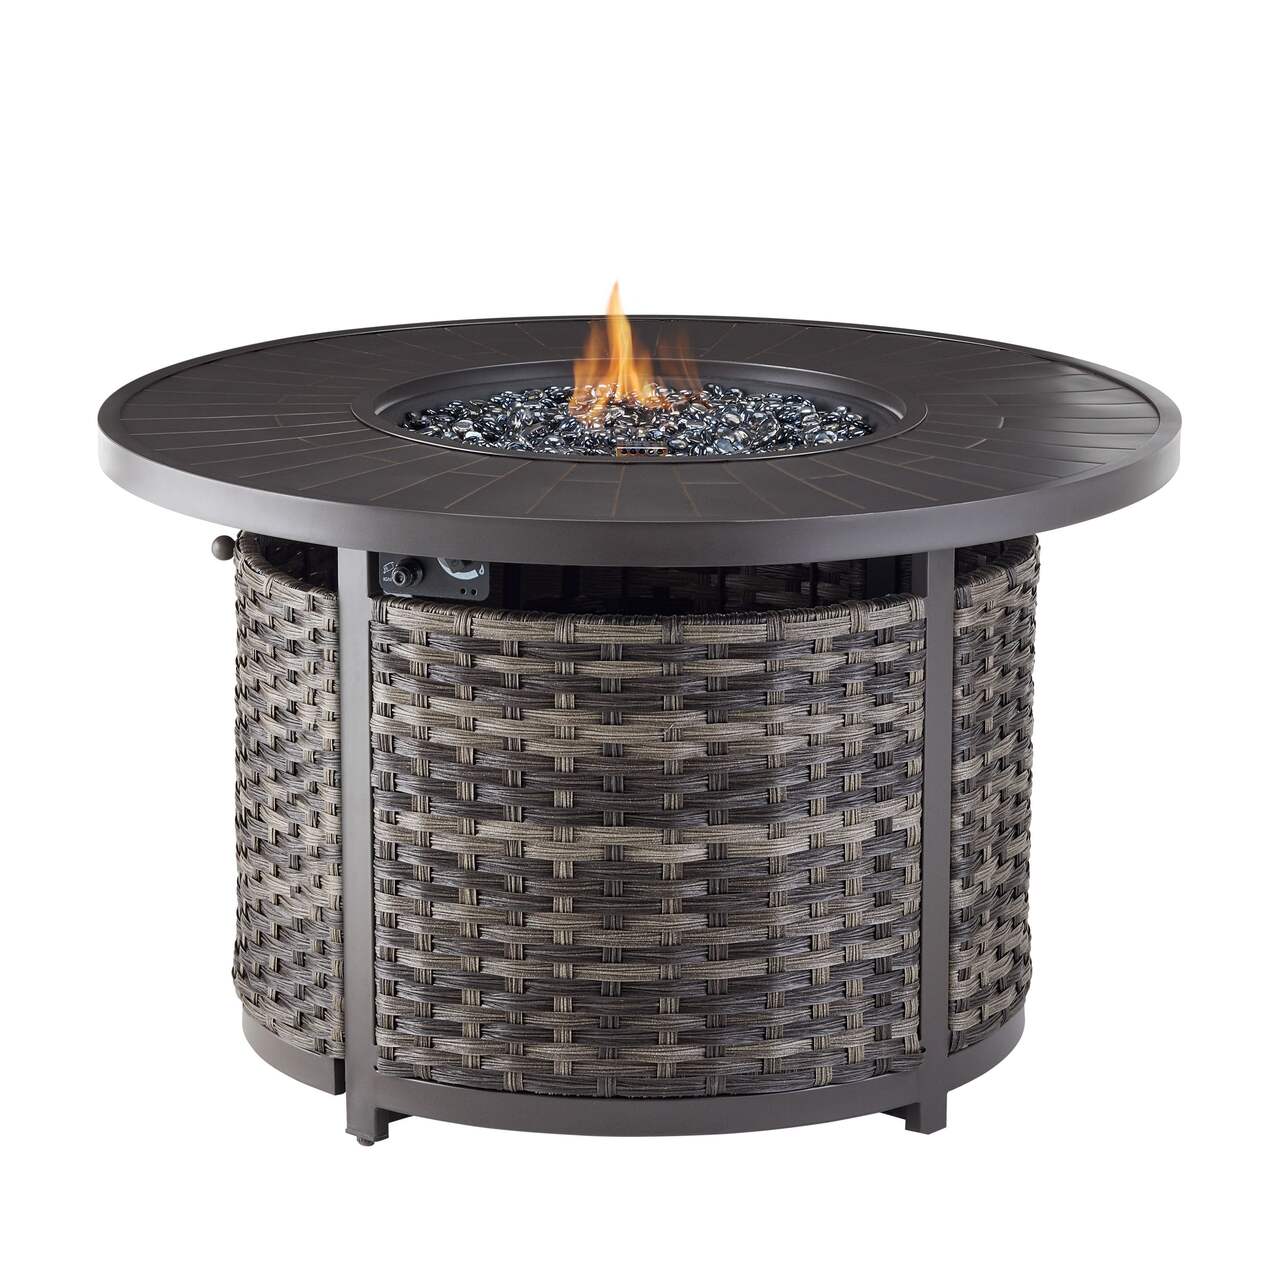 Engine Block fire pit table